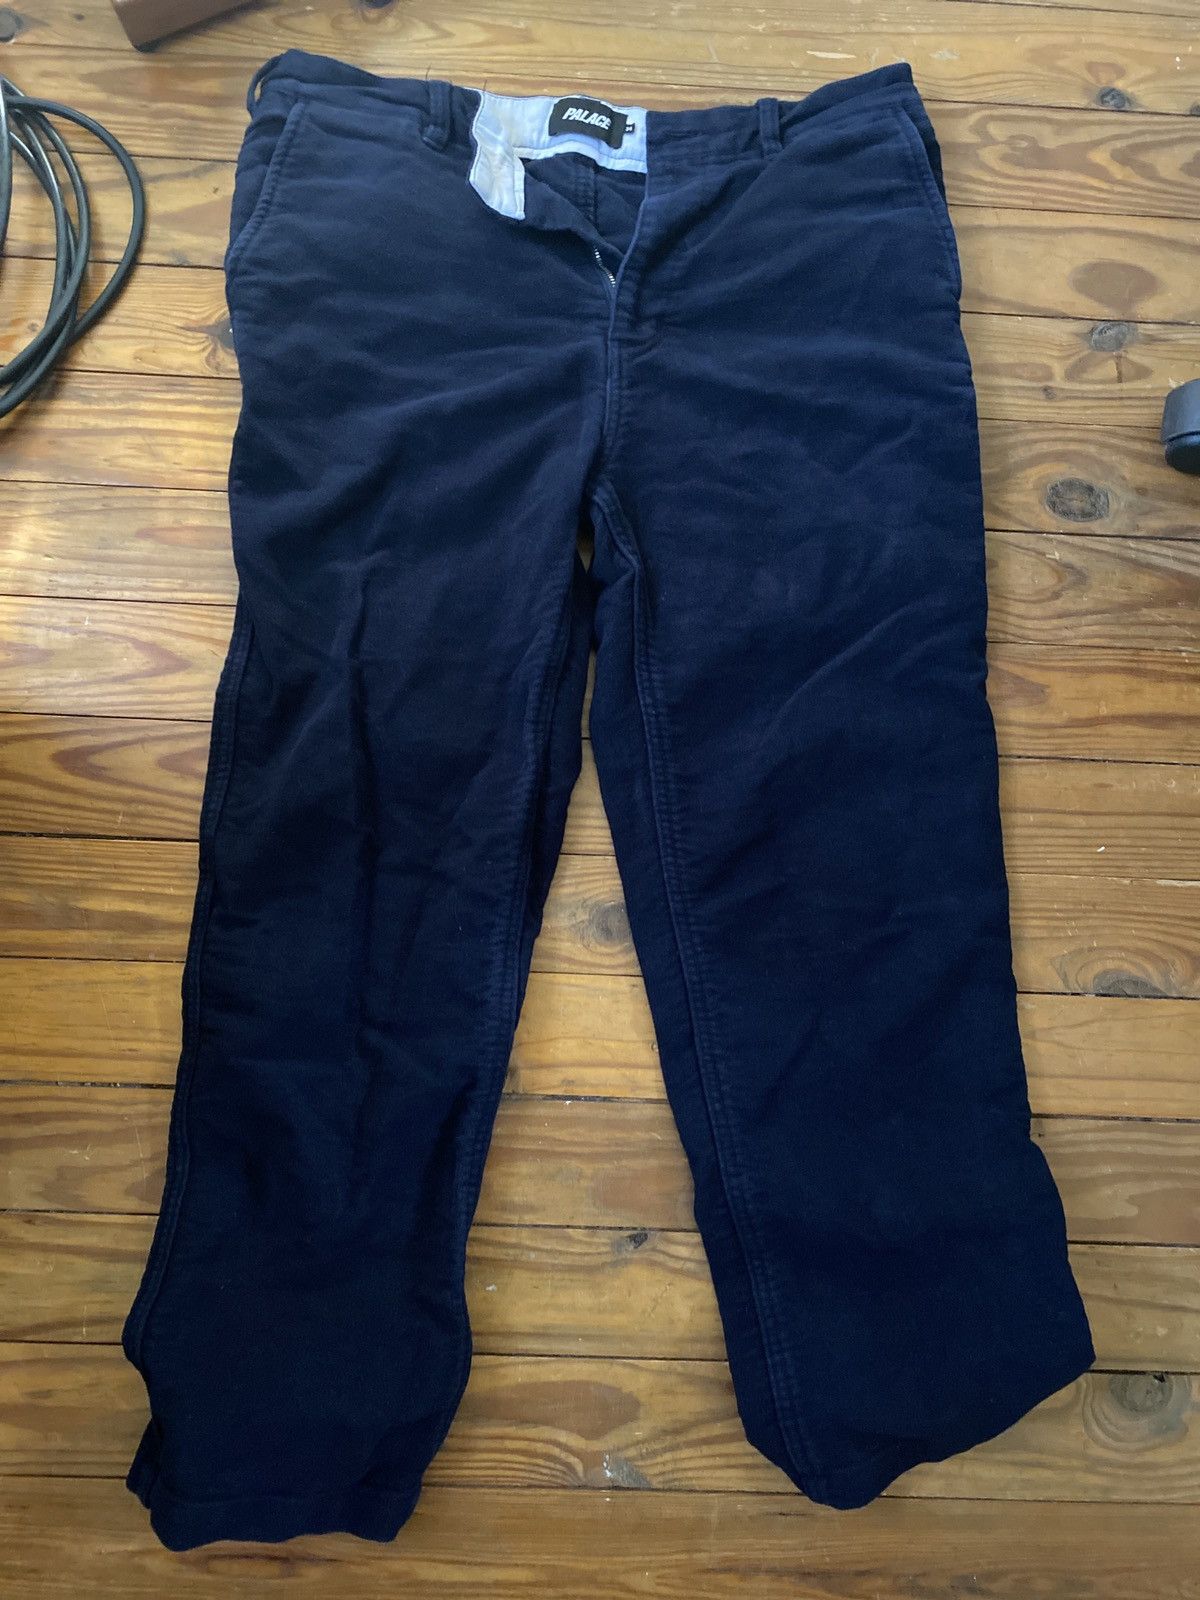 Palace Palace Melo trousers | Grailed